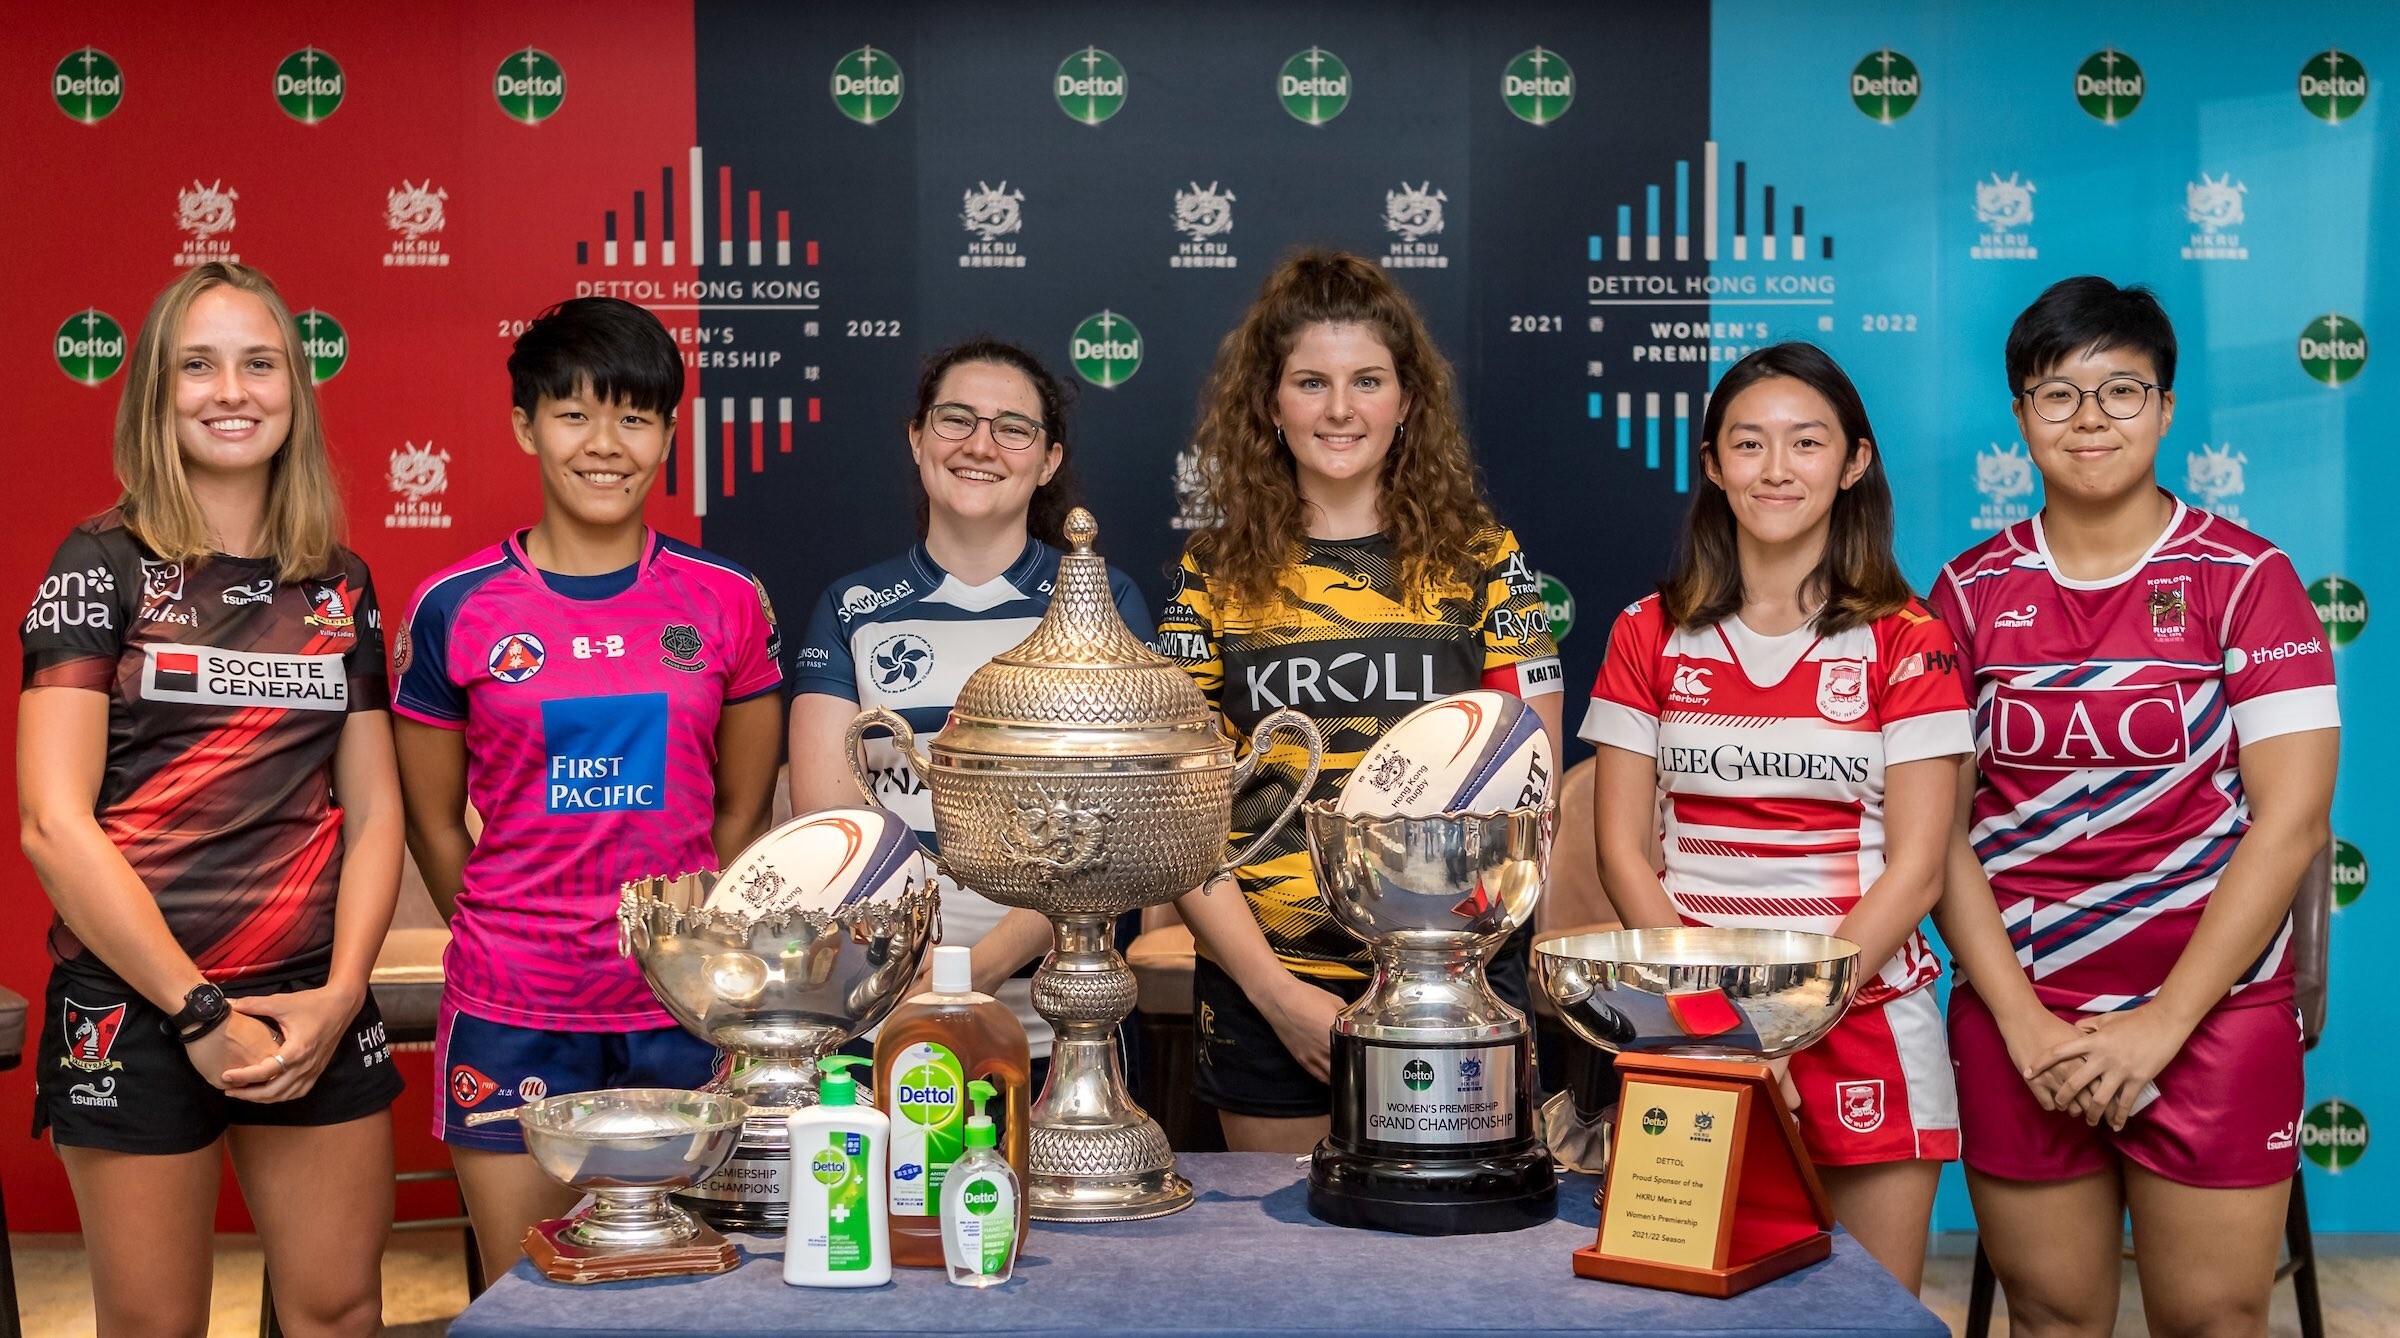 Team captains and representatives at the HKRU Dettol Women's Premiership 2021-2022 season launch at Hong Kong Football Club in Causeway Bay in September. Photo: Ike Images